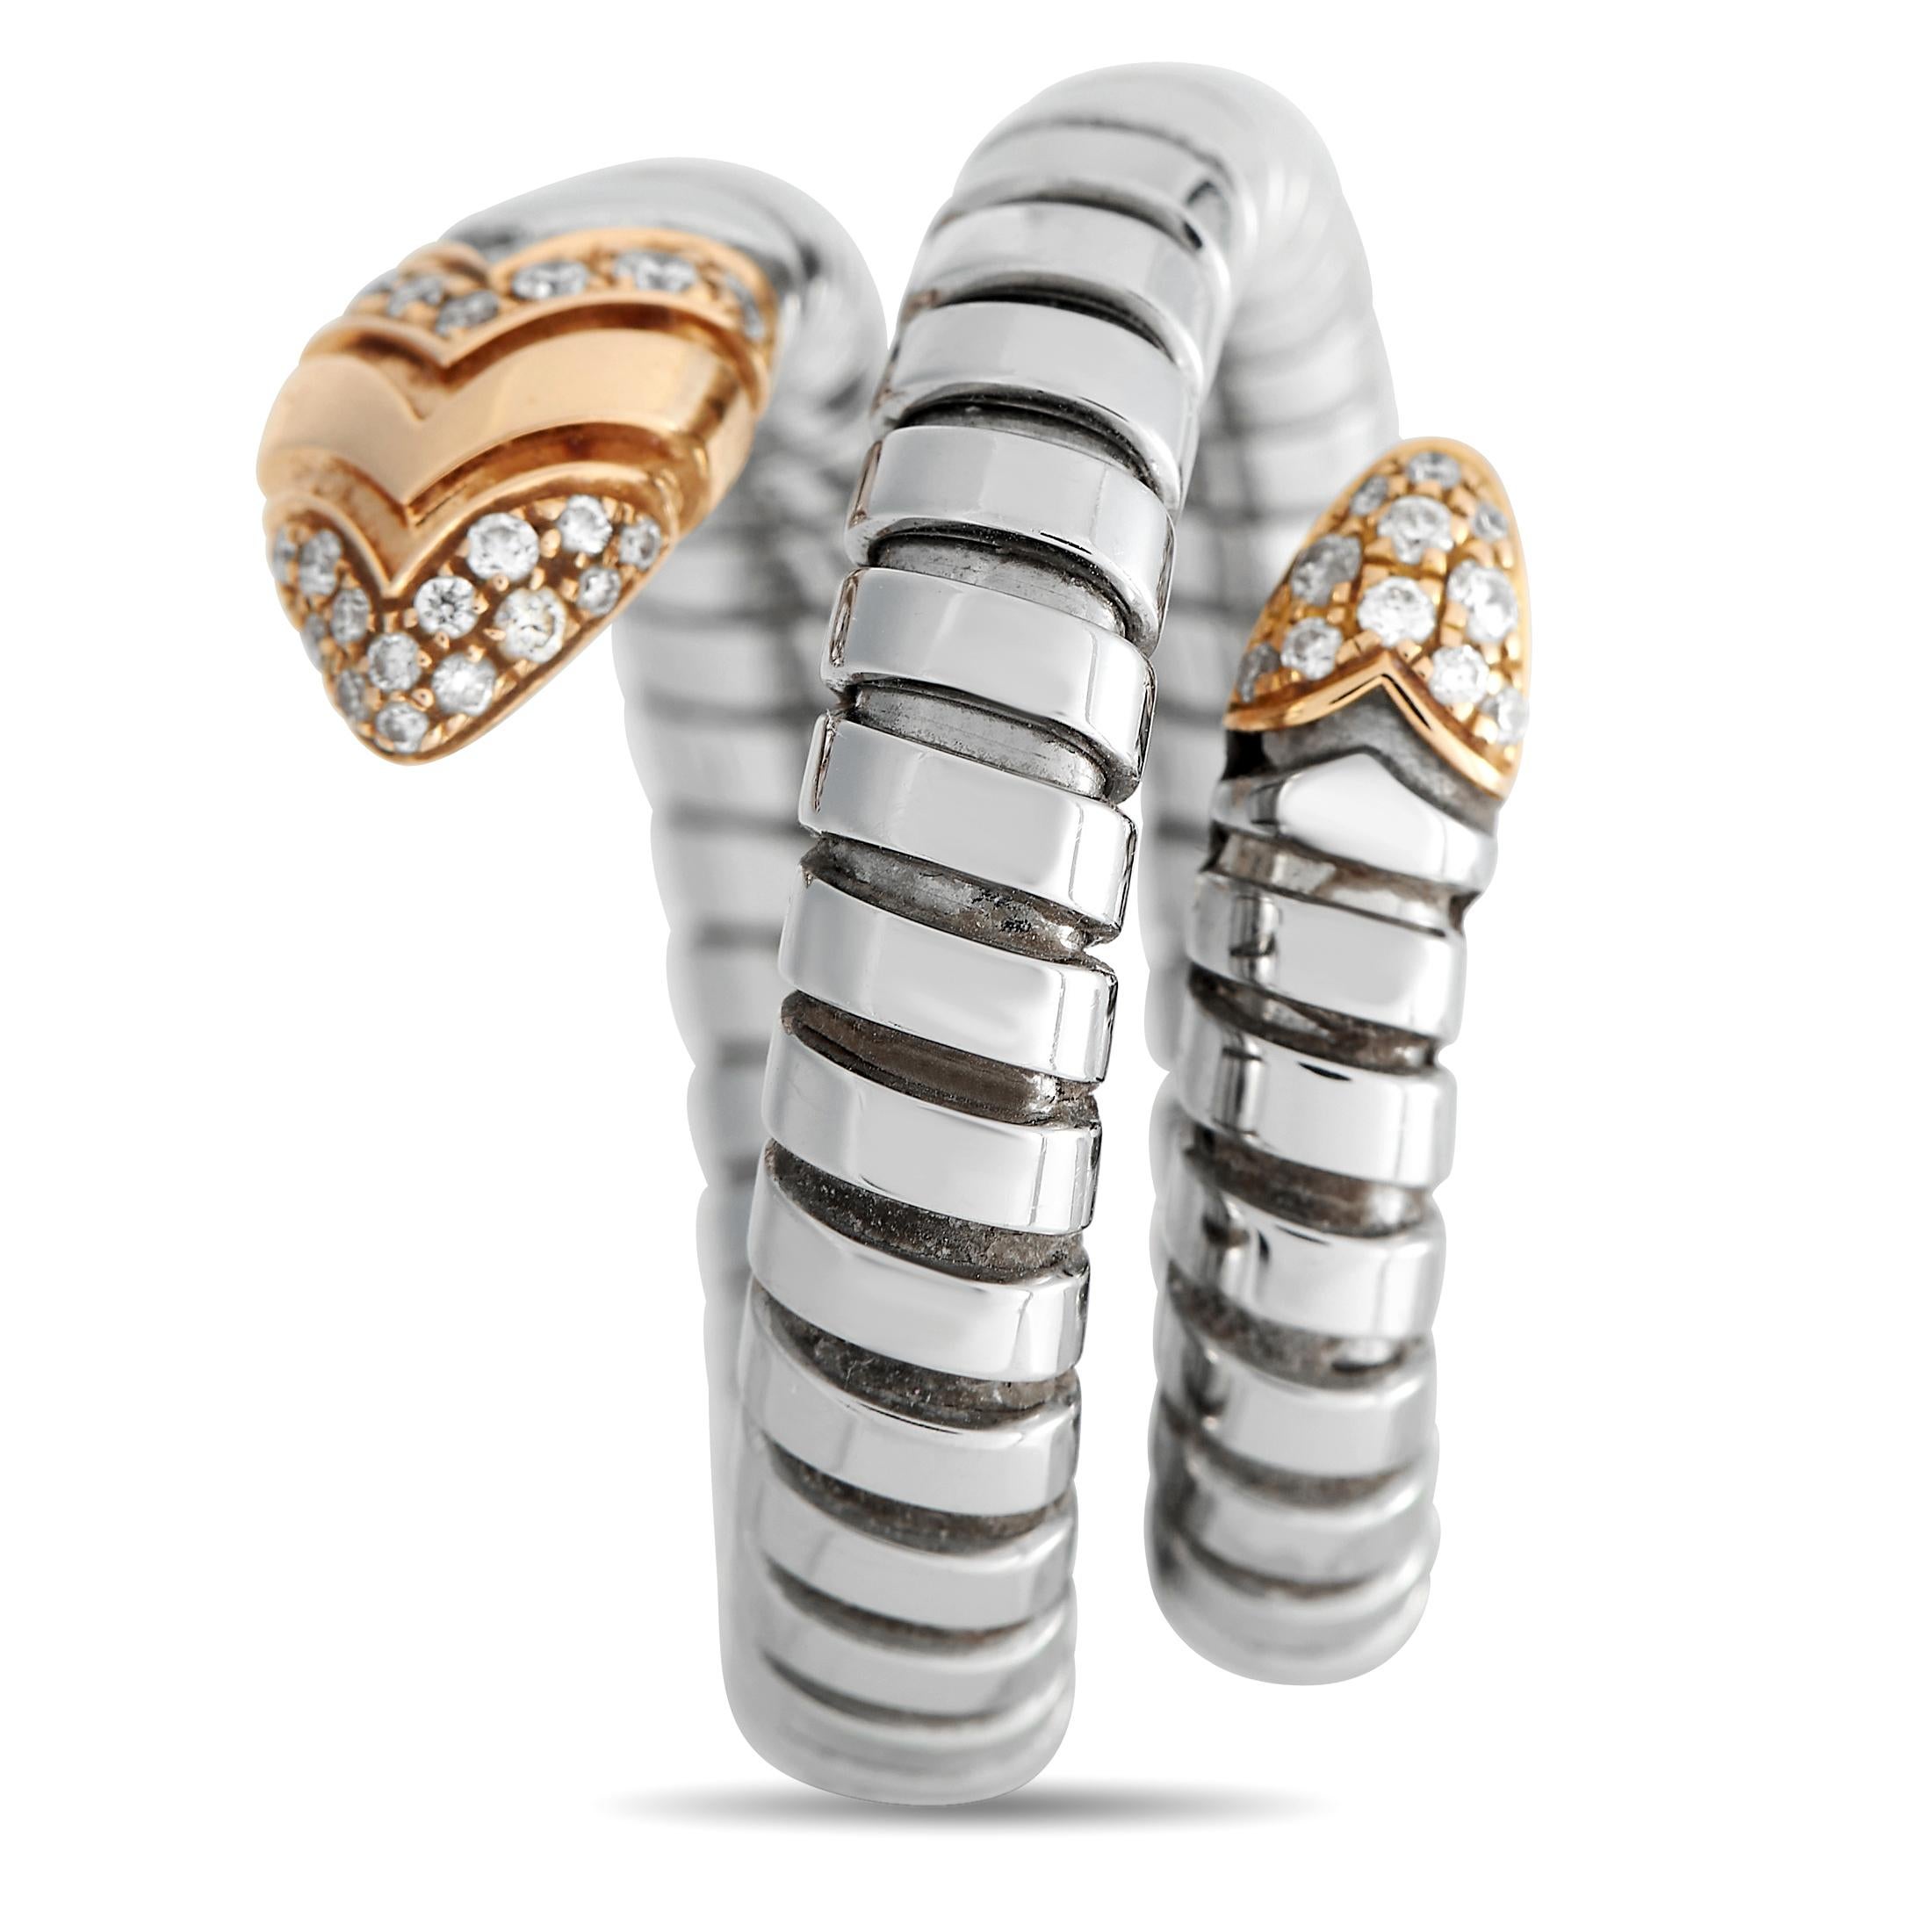 Meant to resemble the fluid shape of a serpent, this Bvlgari Serpenti Tubogas ring will continually capture your imagination. The Stainless Steel body wraps around the finger on this impressive accessory, which features a 10mm wide band and a 3mm